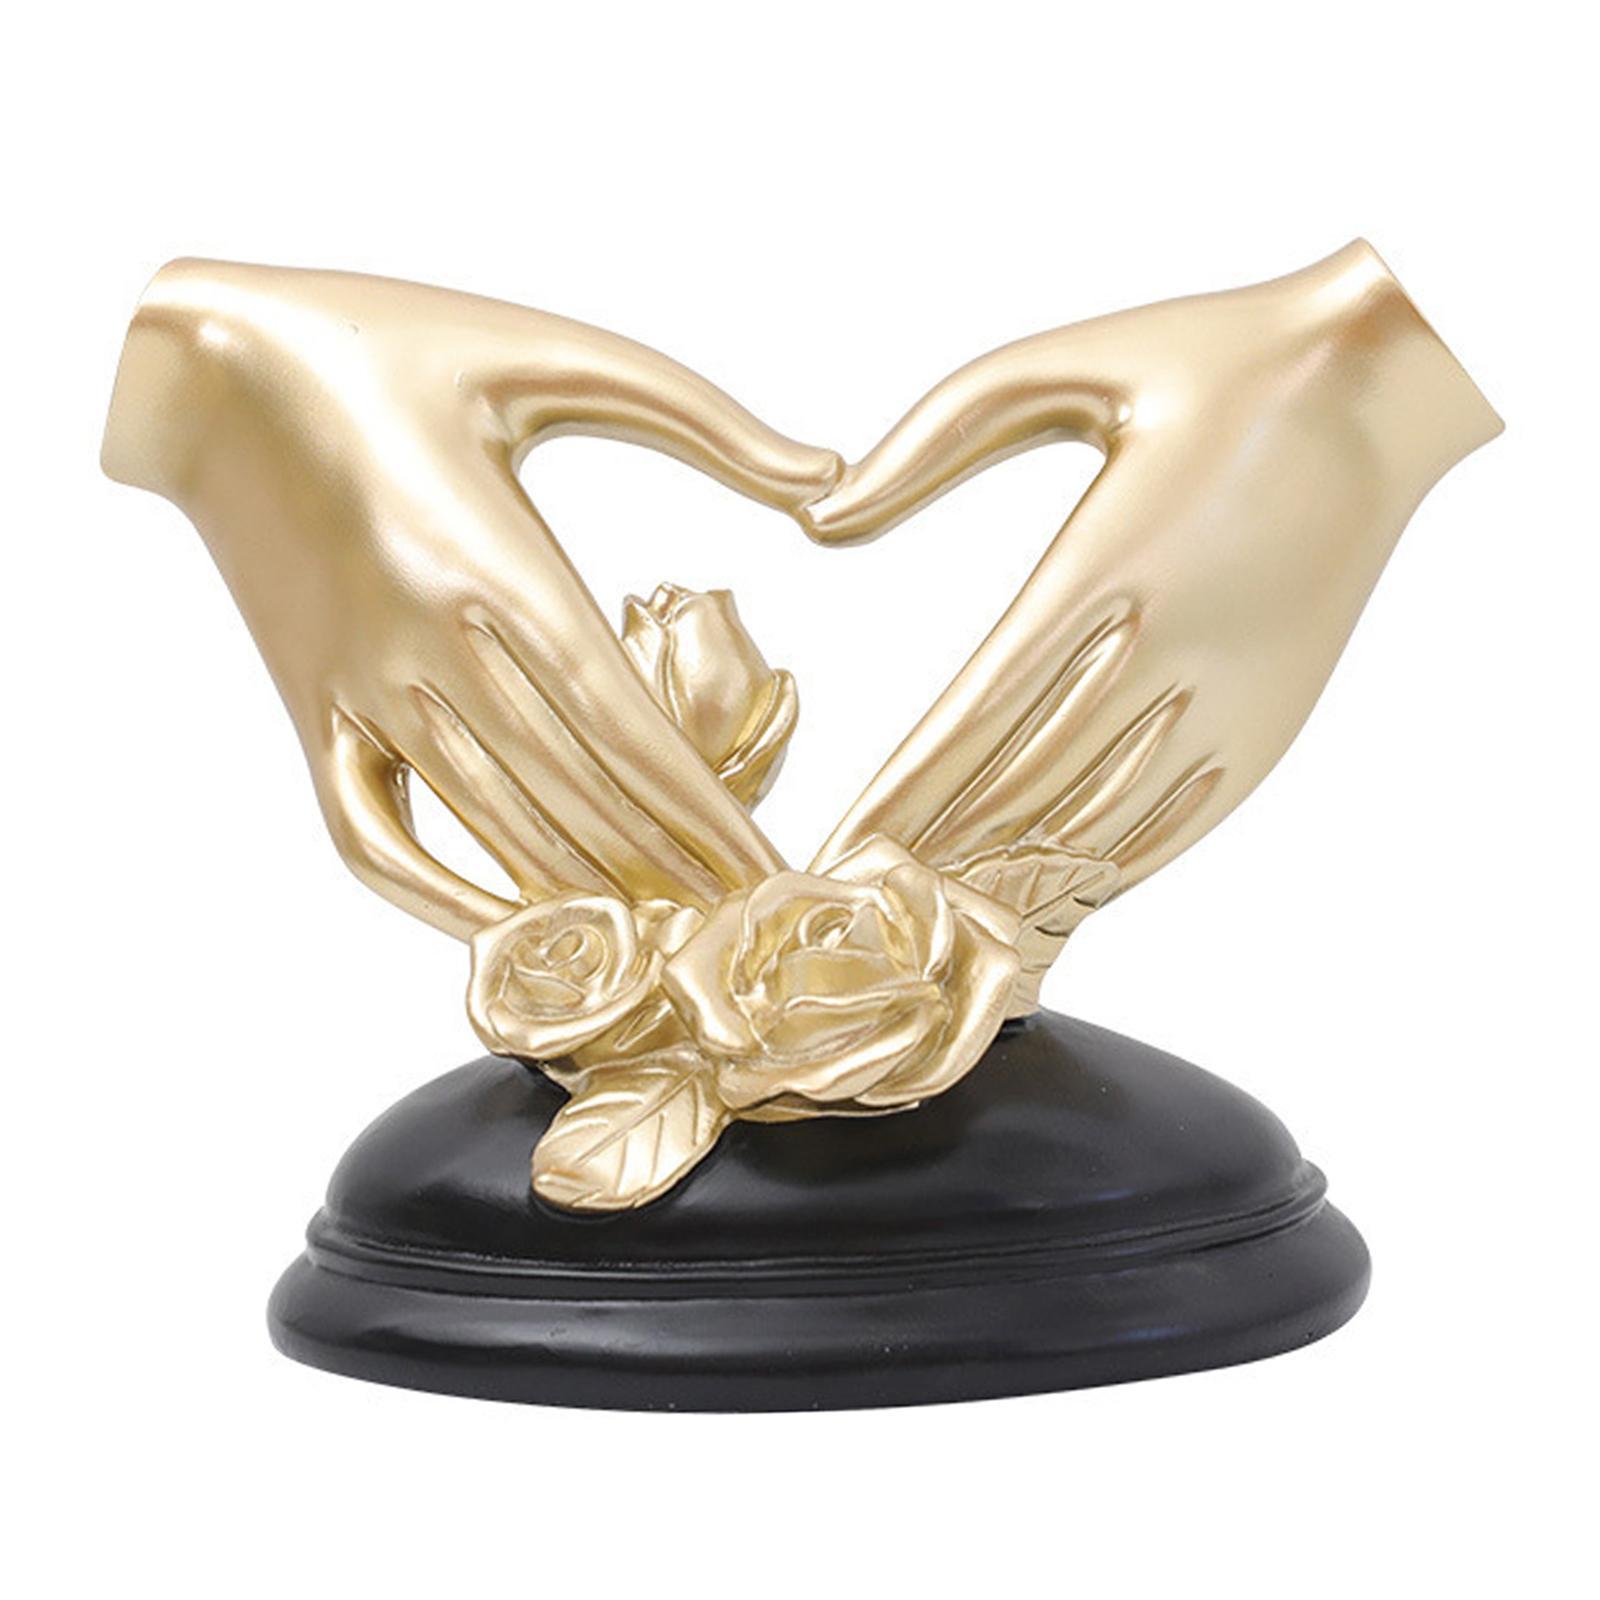 Lover  Resin Statues Sculptures  Gesture Figurines  Souvenirs Gifts for Bedroom Bookshelf Wedding   Office